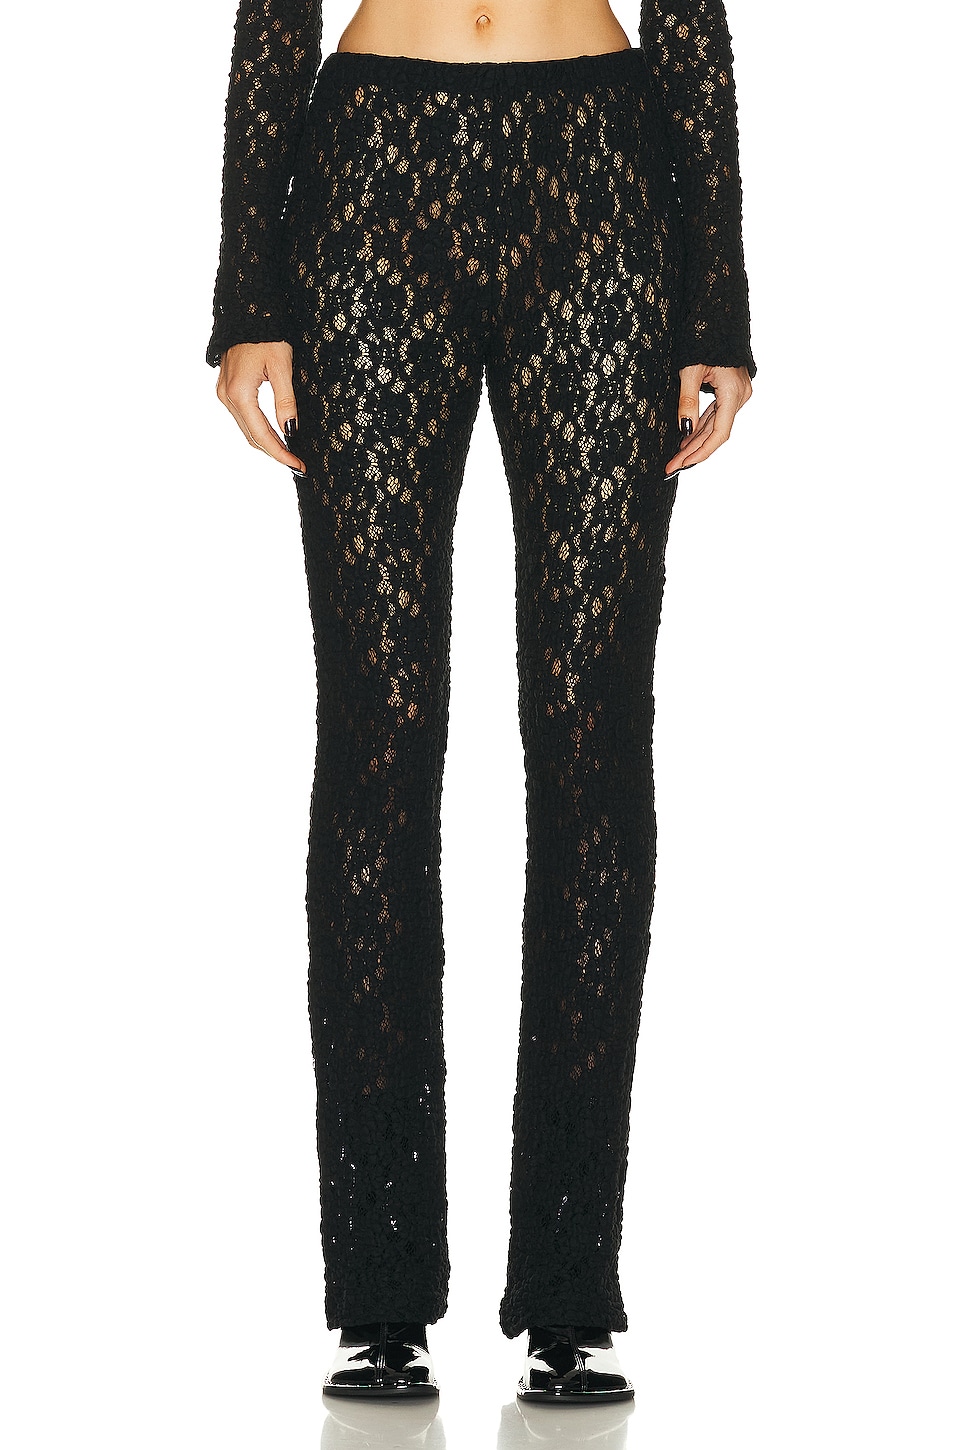 Image 1 of Chloe Flare Lace Pant in Black